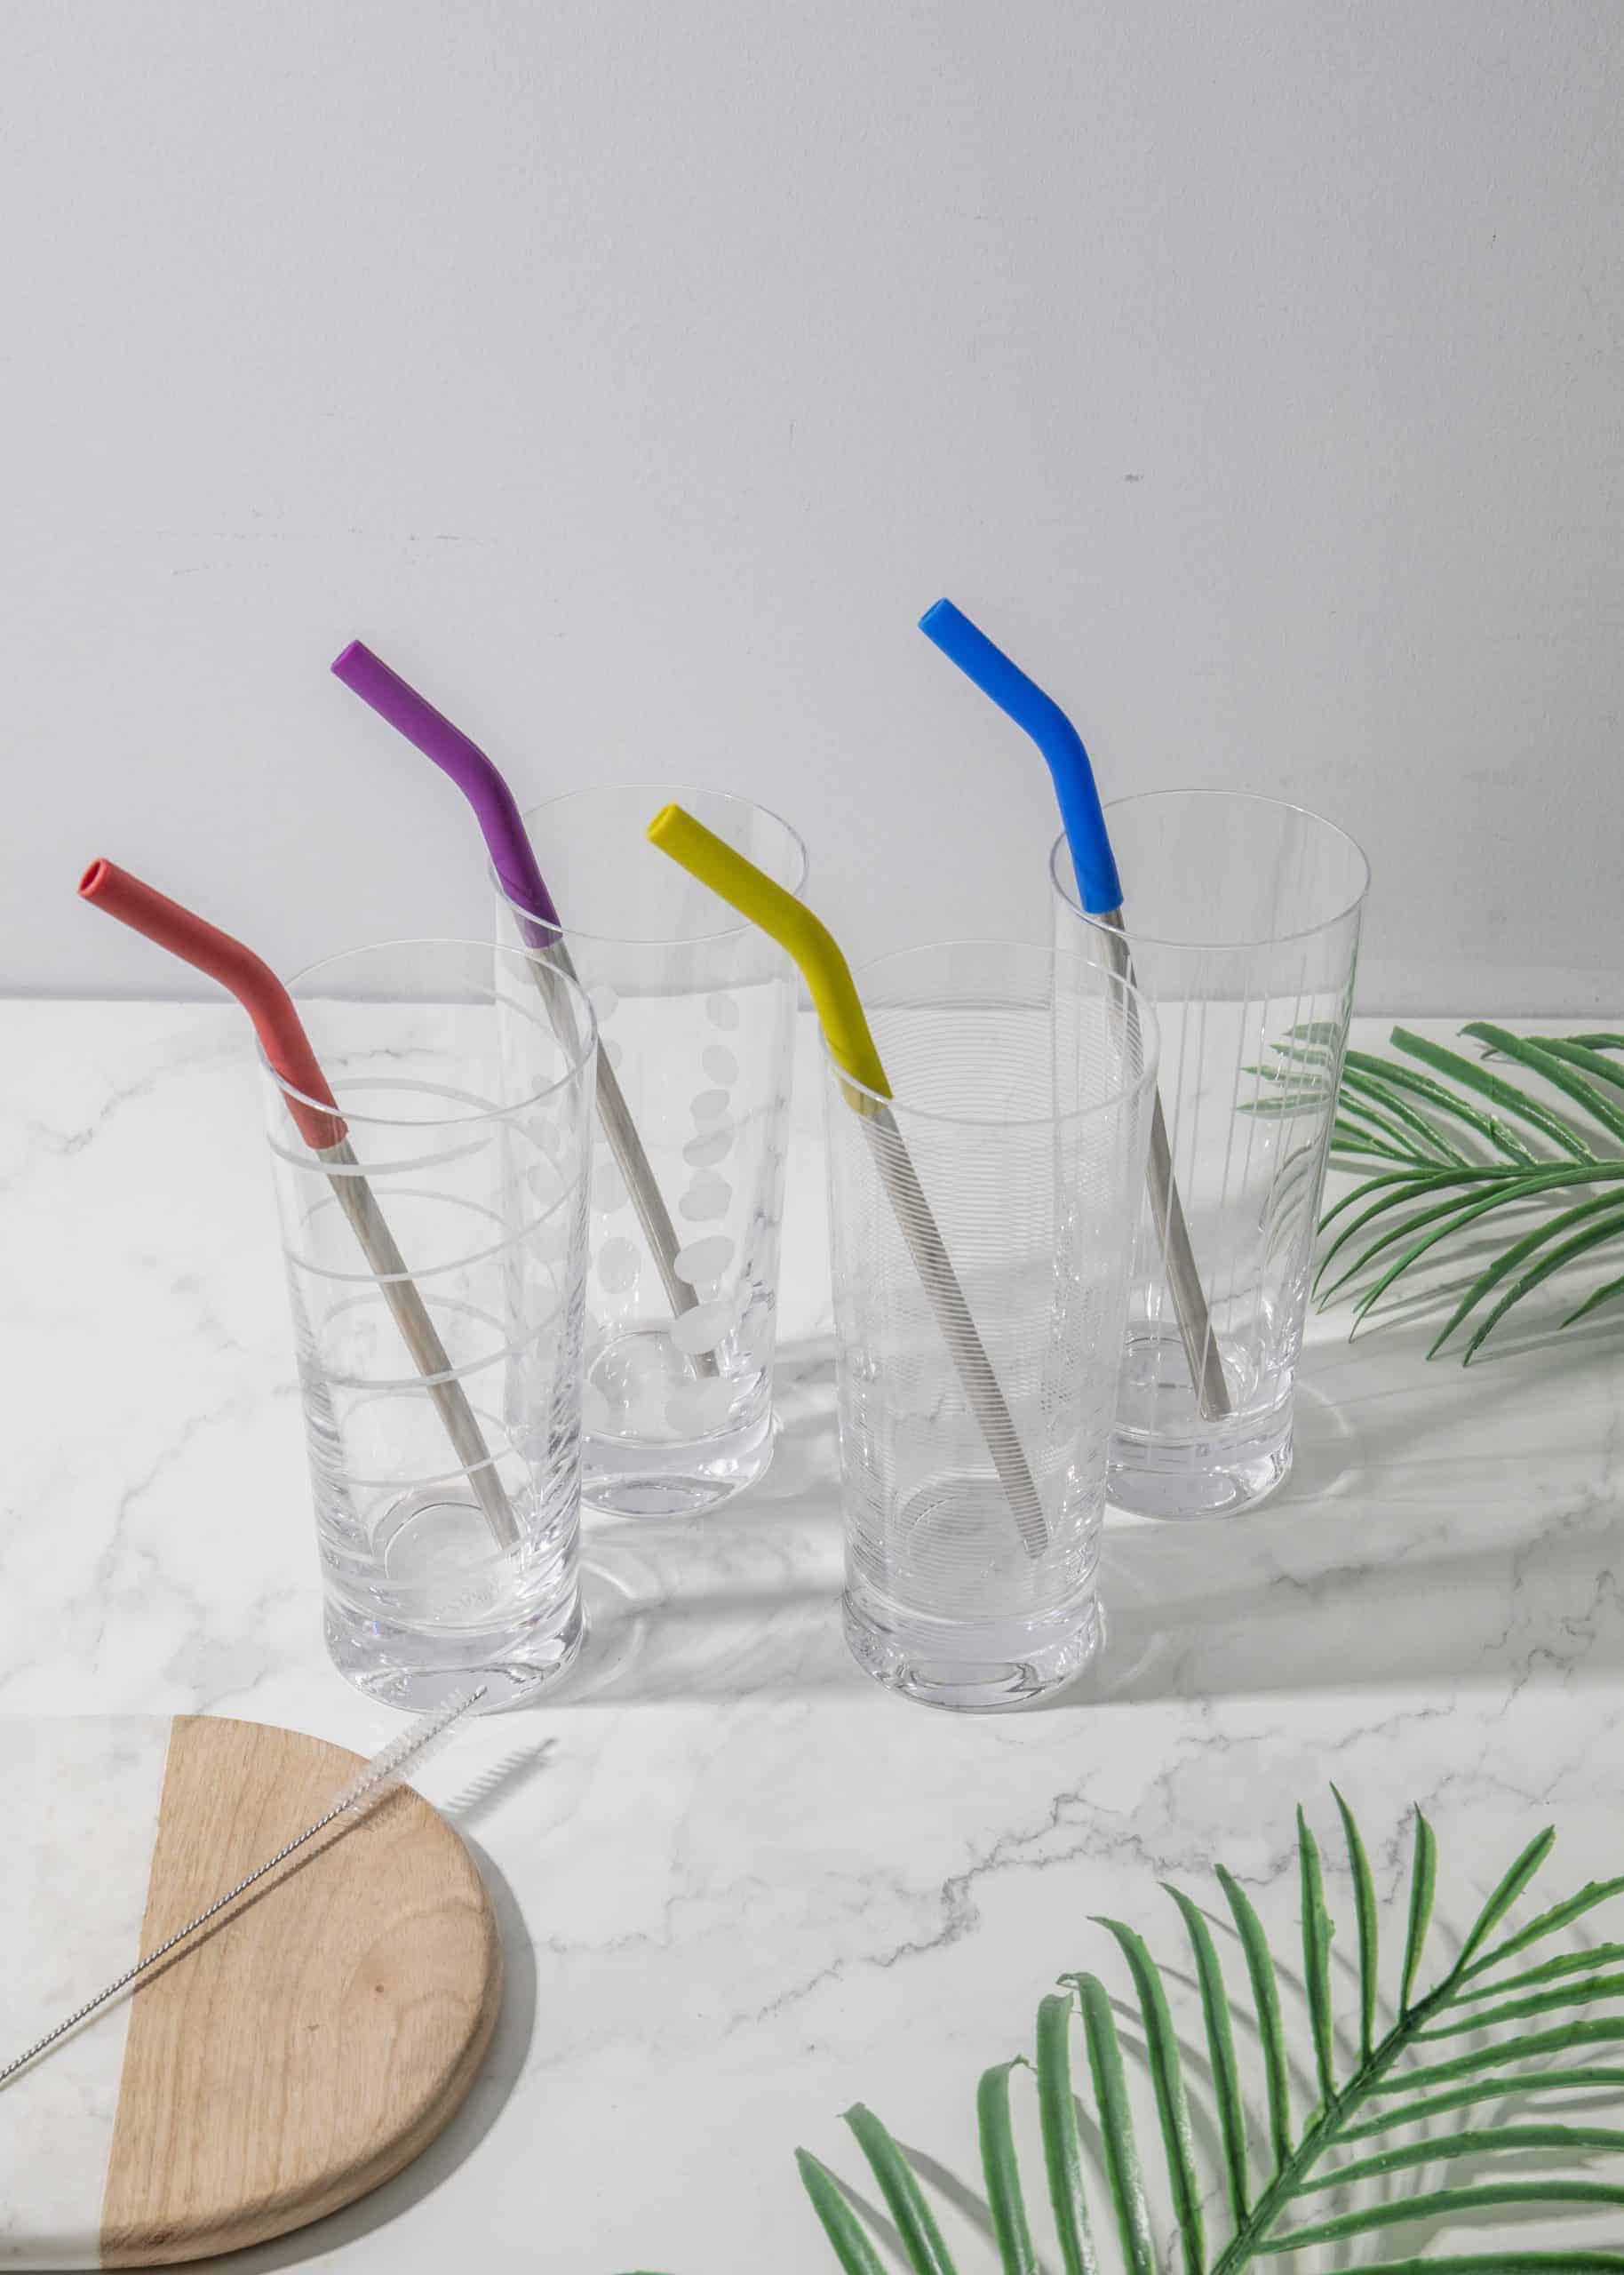 Reusable Metal Straw Bruch Cleaner Colourworks